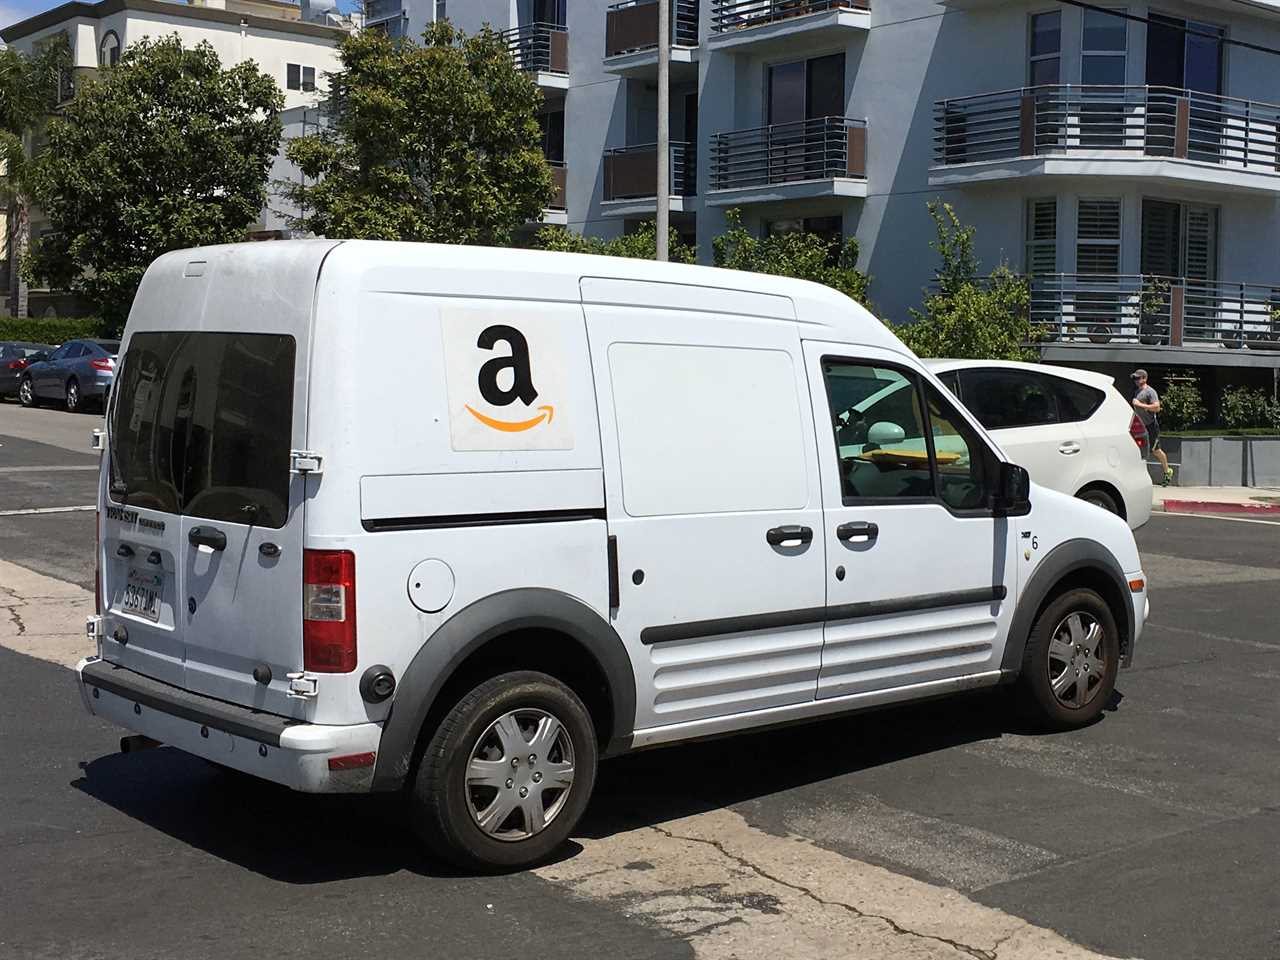 A white Amazon delivery truck sits in a parking lot in front of a building.